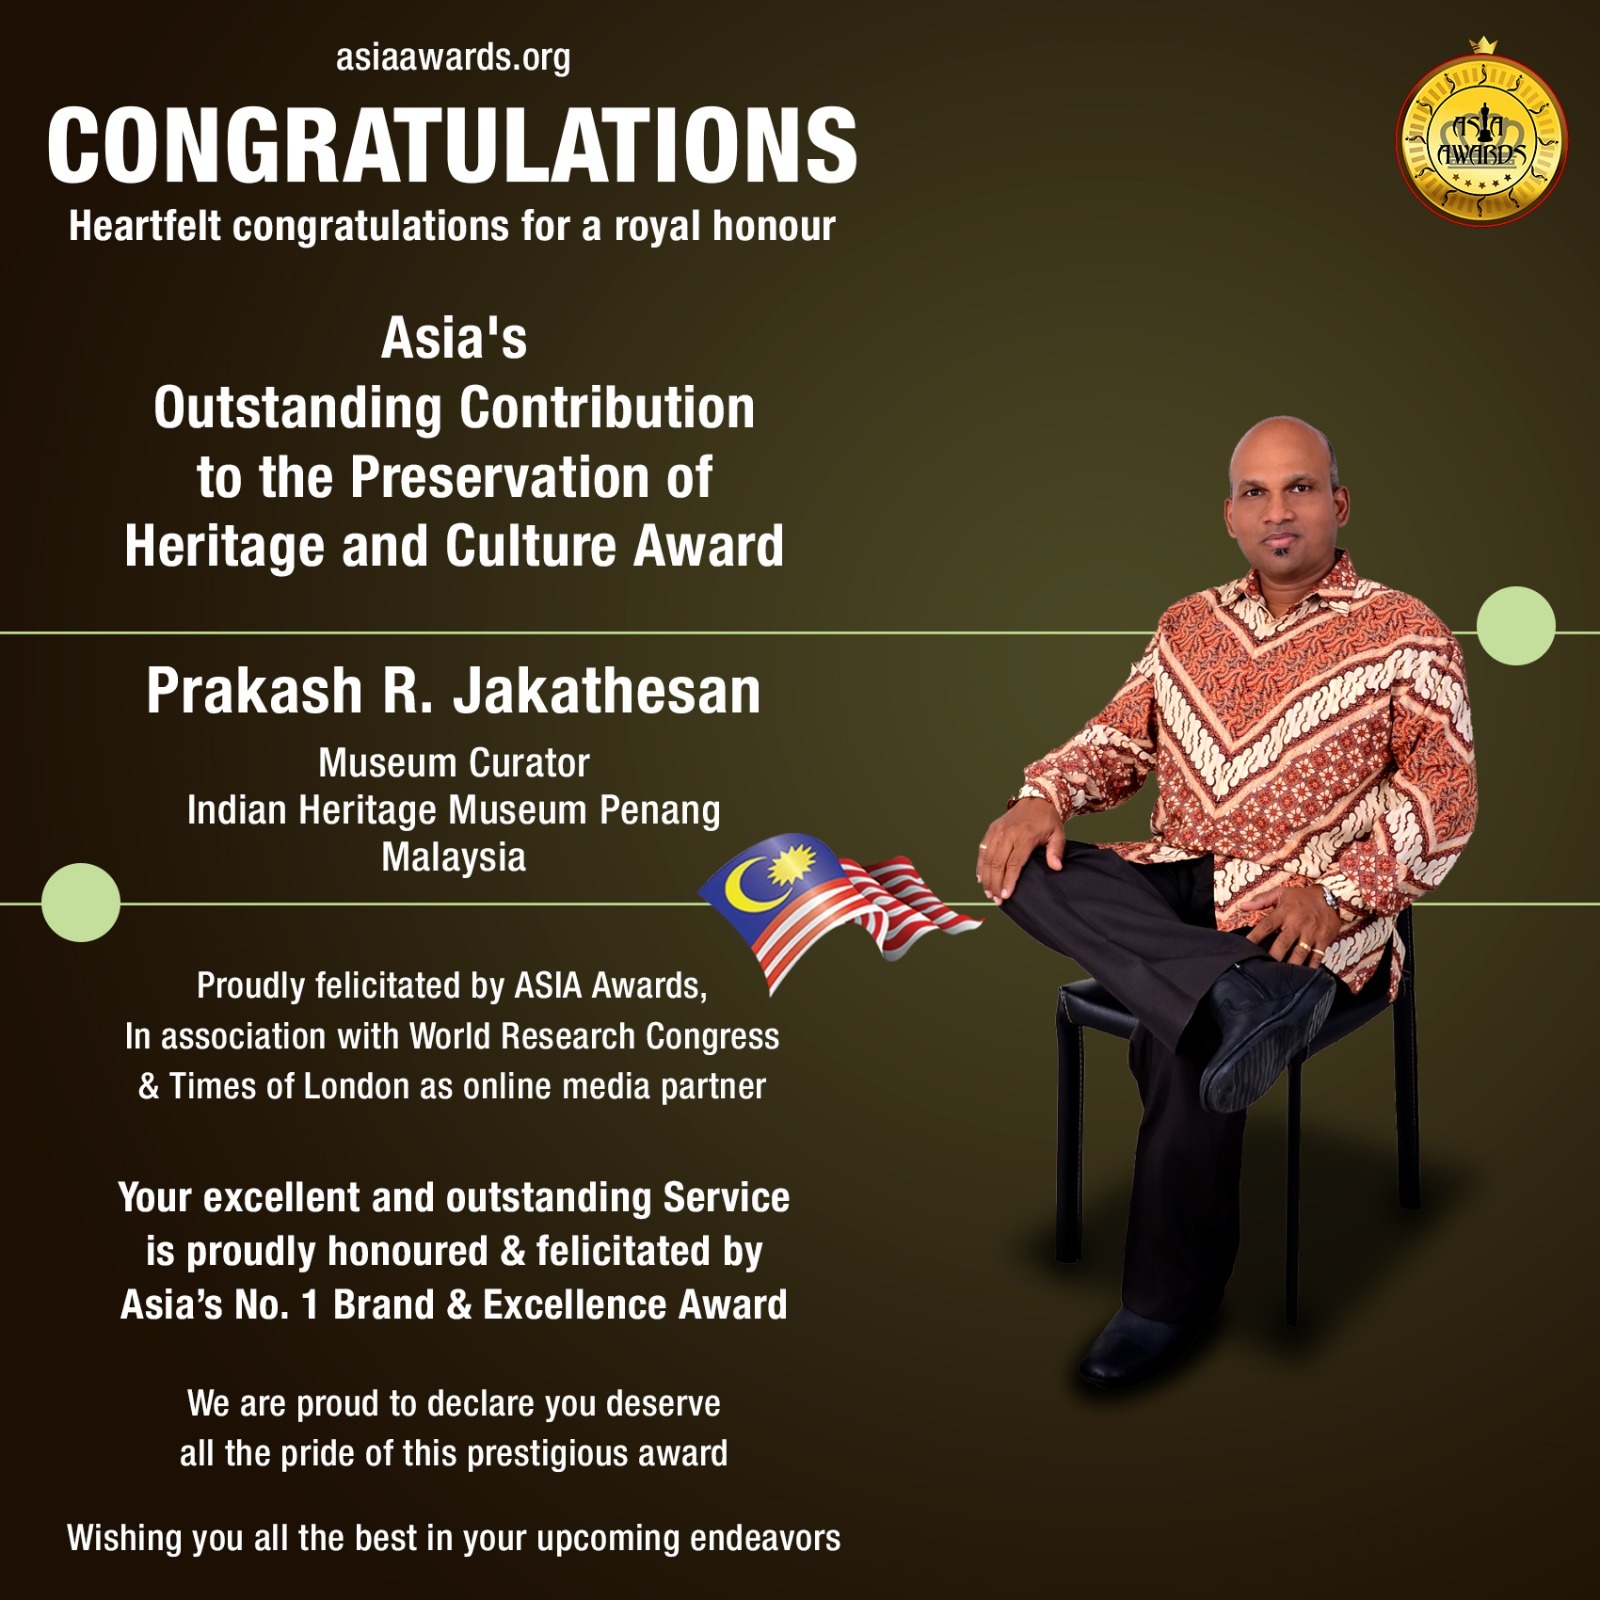 Prakash R. Jakathesan Has bagged Asia's Outstanding Contribution to the Preservation of Heritage and Culture Award